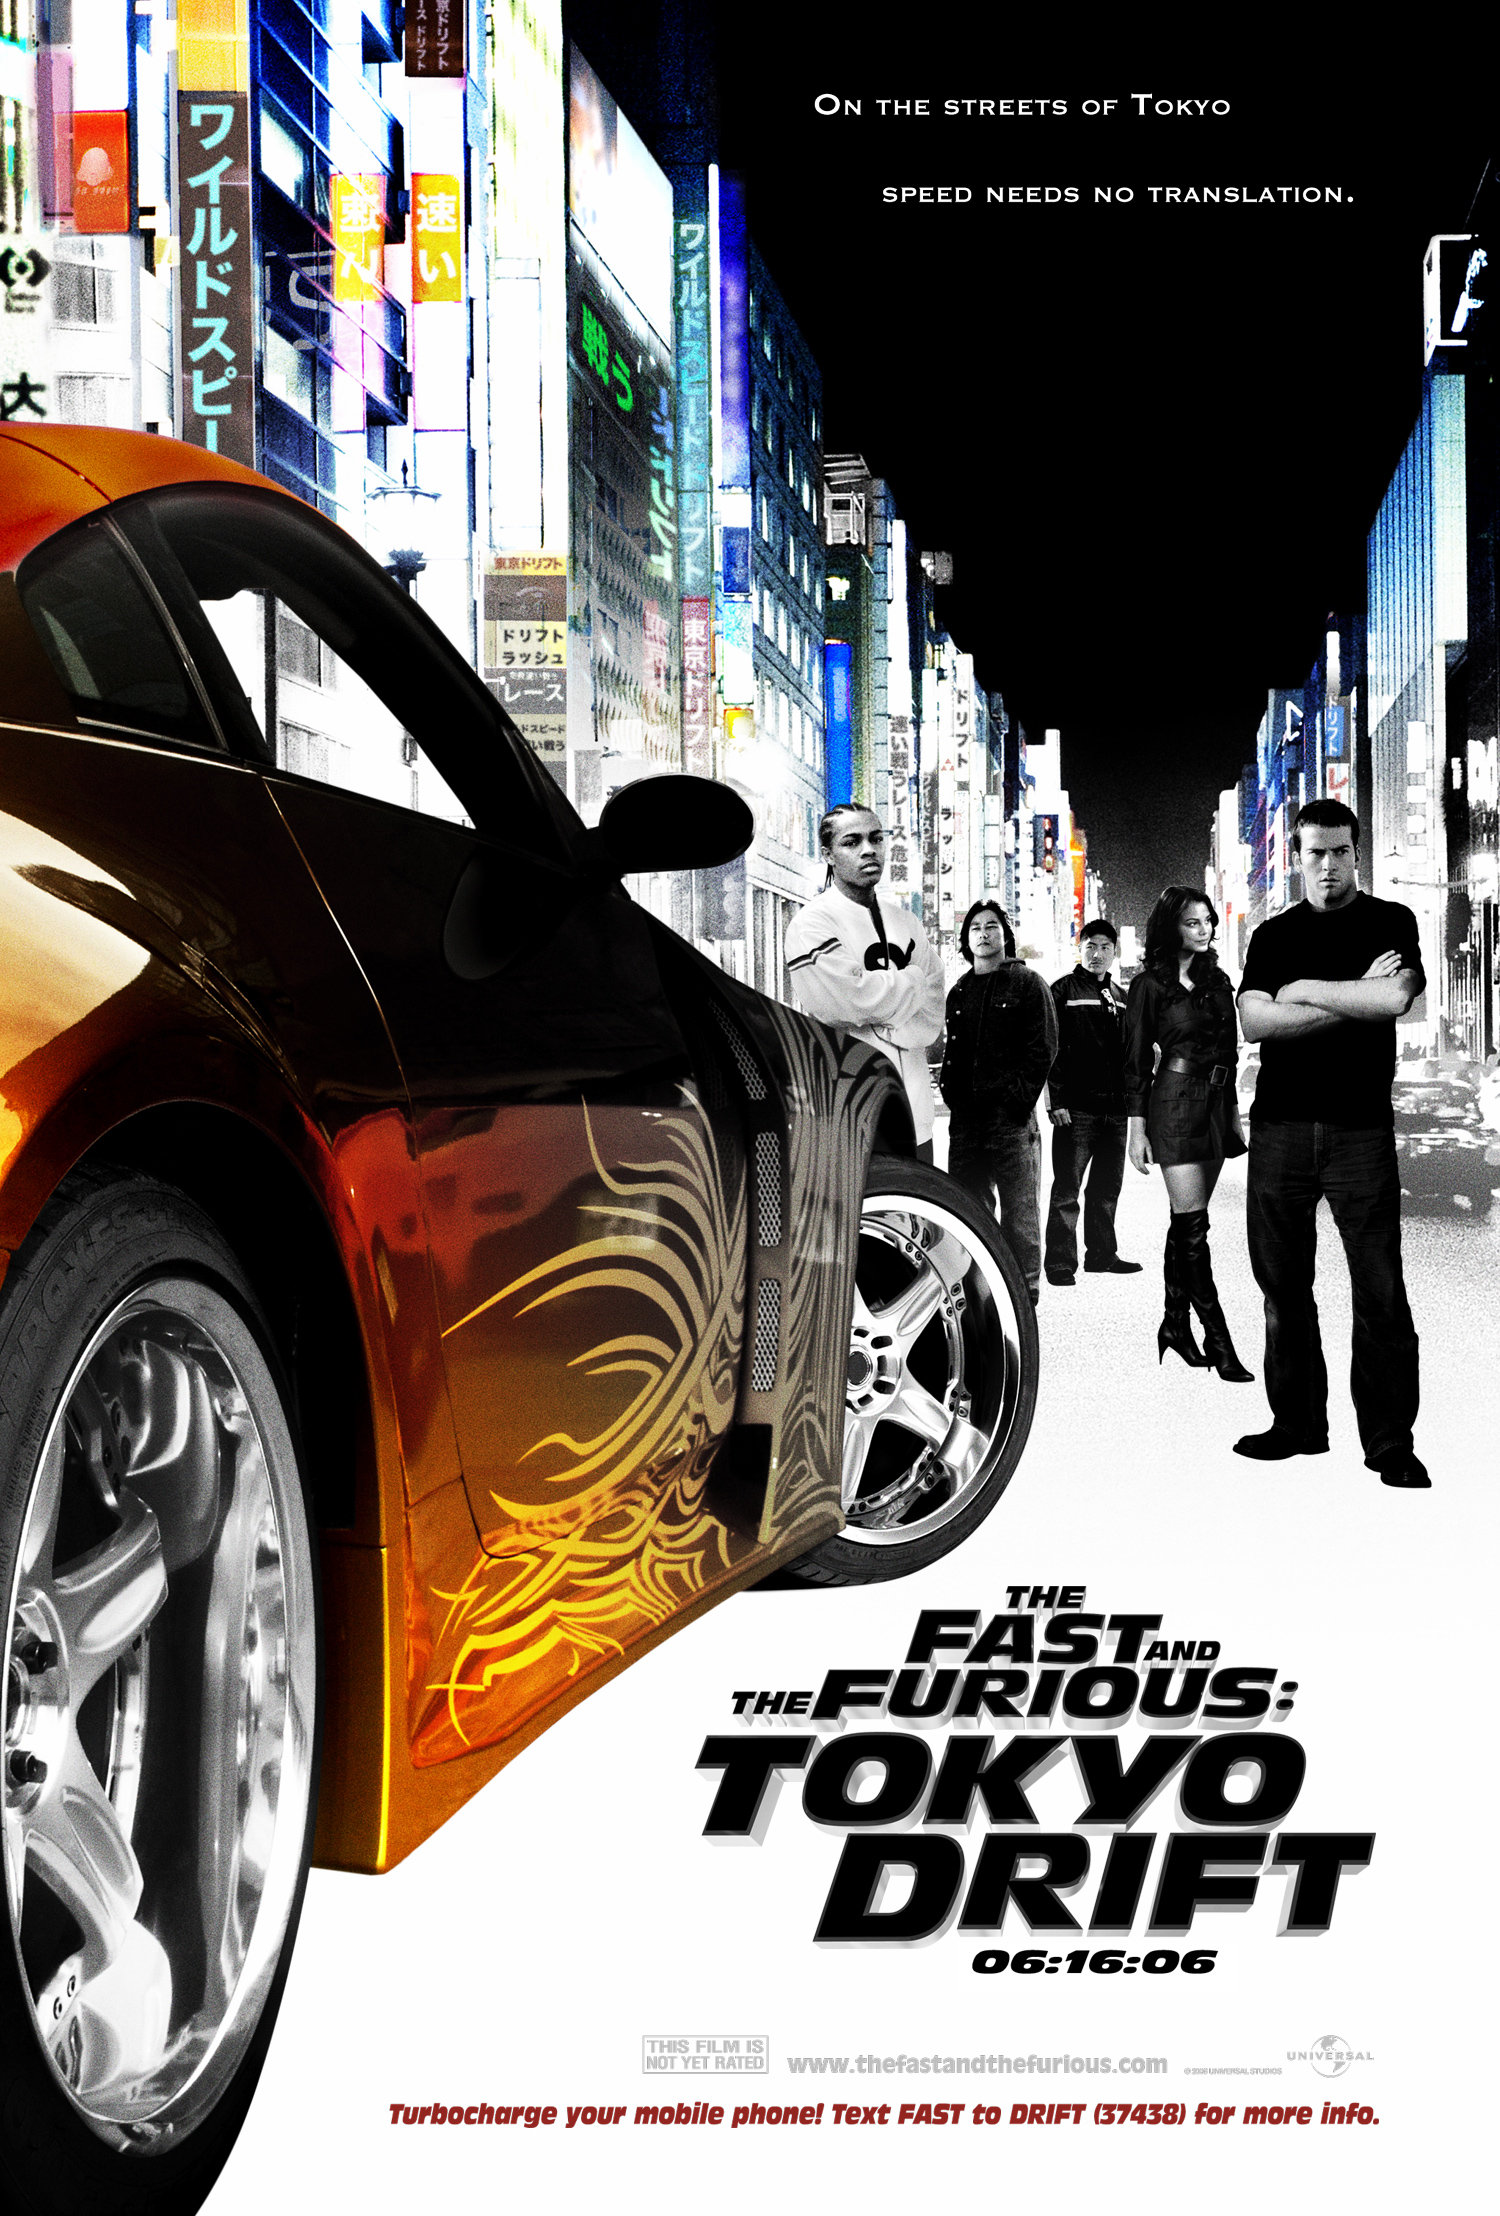 <p><em>toyko drift playing</em></p><p>Sean Boswell (Lucas Black) always feels like an outsider, but he defines himself through his victories as a street racer. His hobby makes him unpopular with the authorities, so he goes to live with his father in Japan. Once there and even more alienated, he learns about an exciting, but dangerous, new style of the sport. The stakes are high when Sean takes on the local champion and falls for the man&apos;s girlfriend.</p>